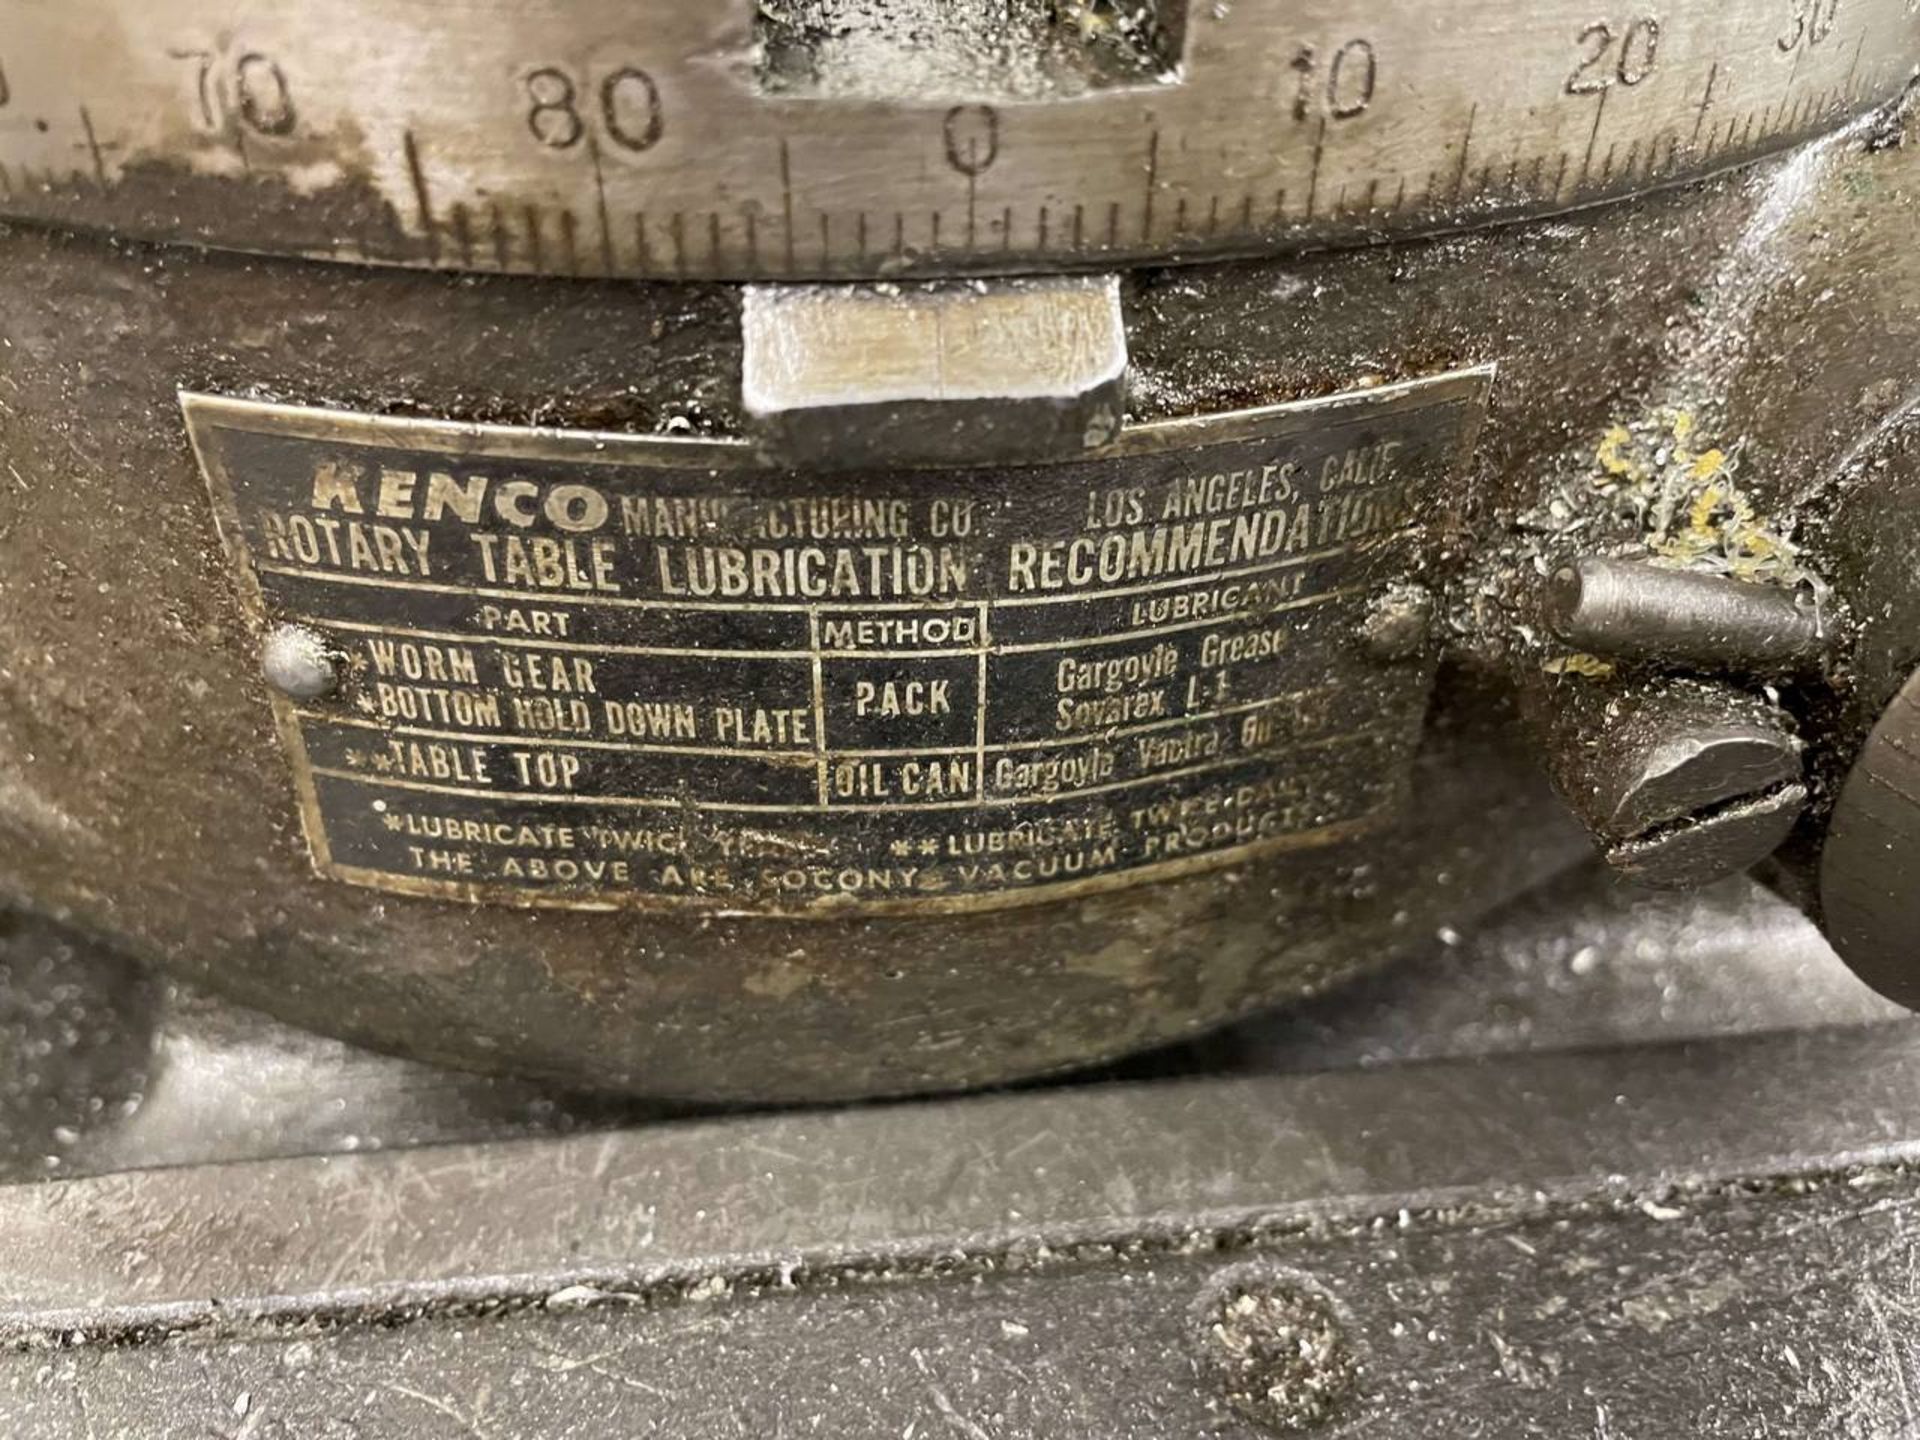 Kenco 8" Rotary Table - Image 3 of 3